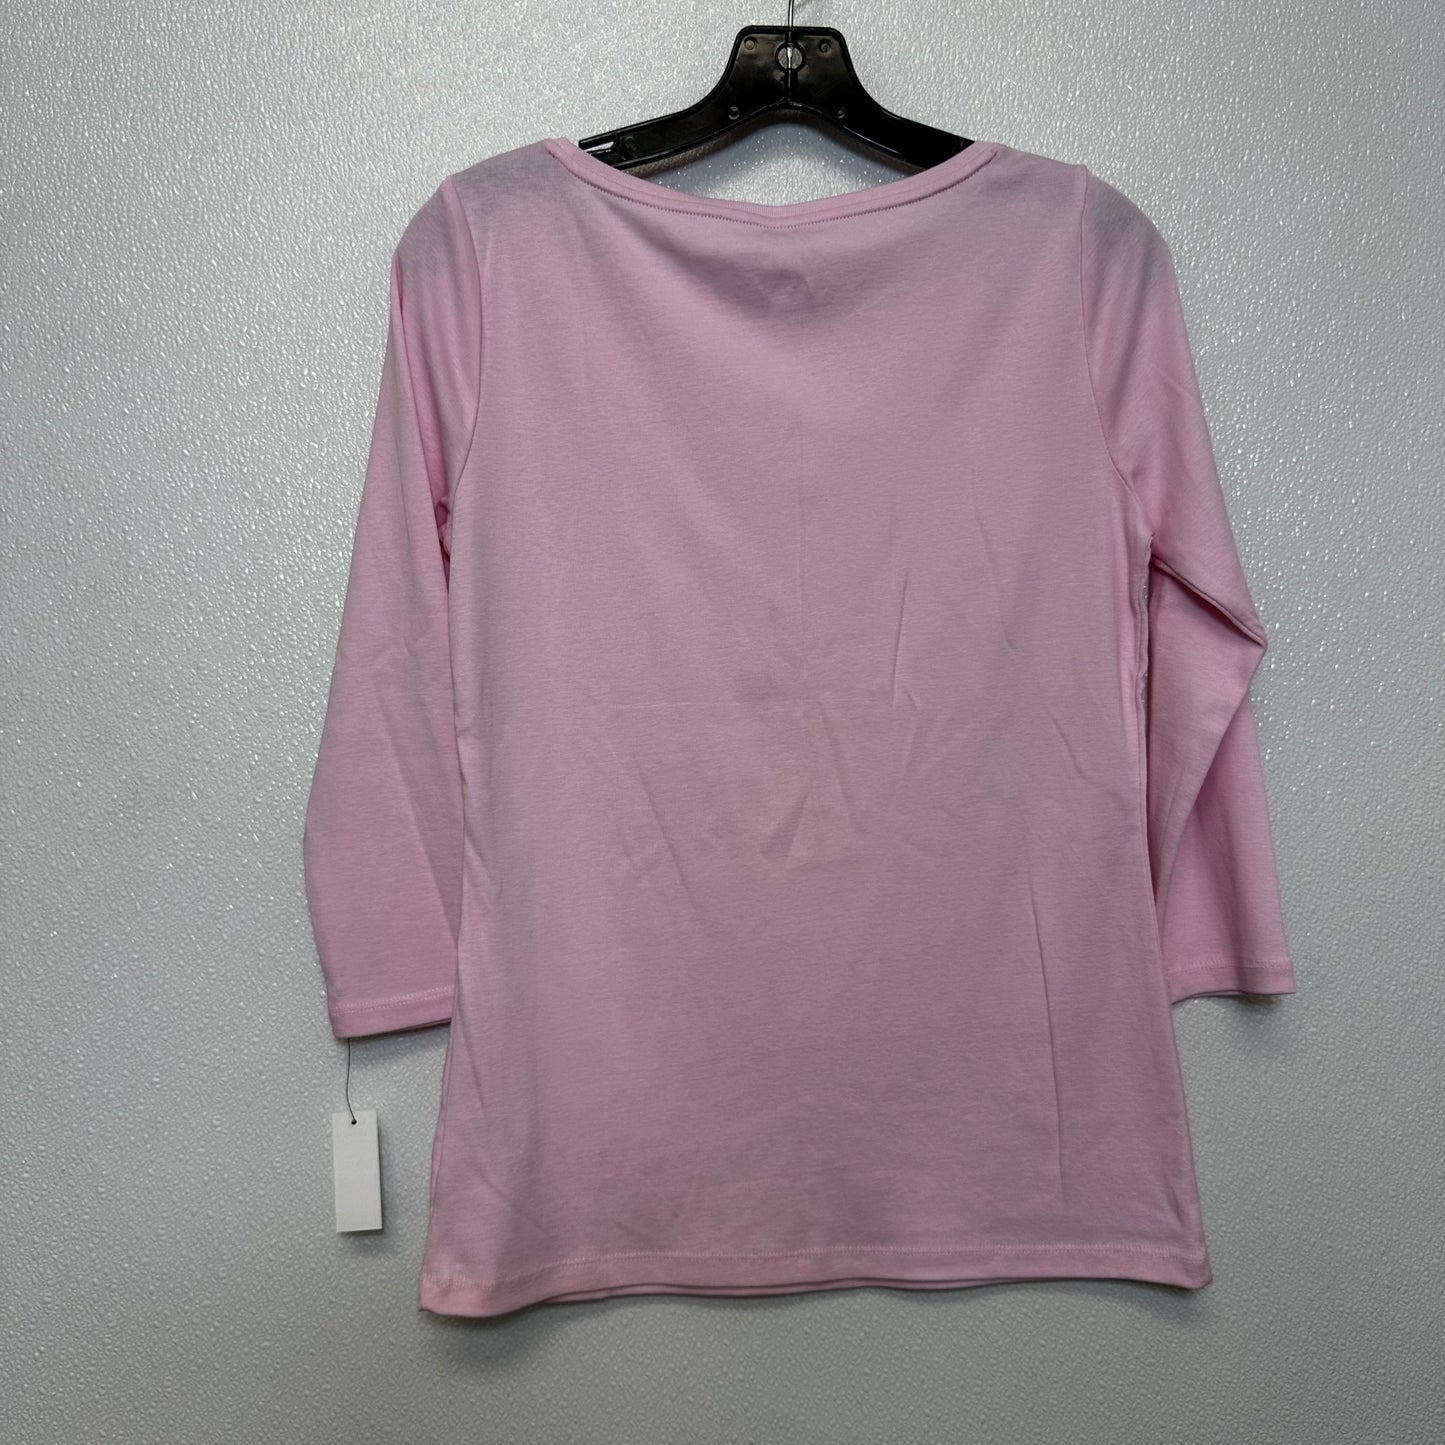 Pink Top Long Sleeve Talbots, Size S